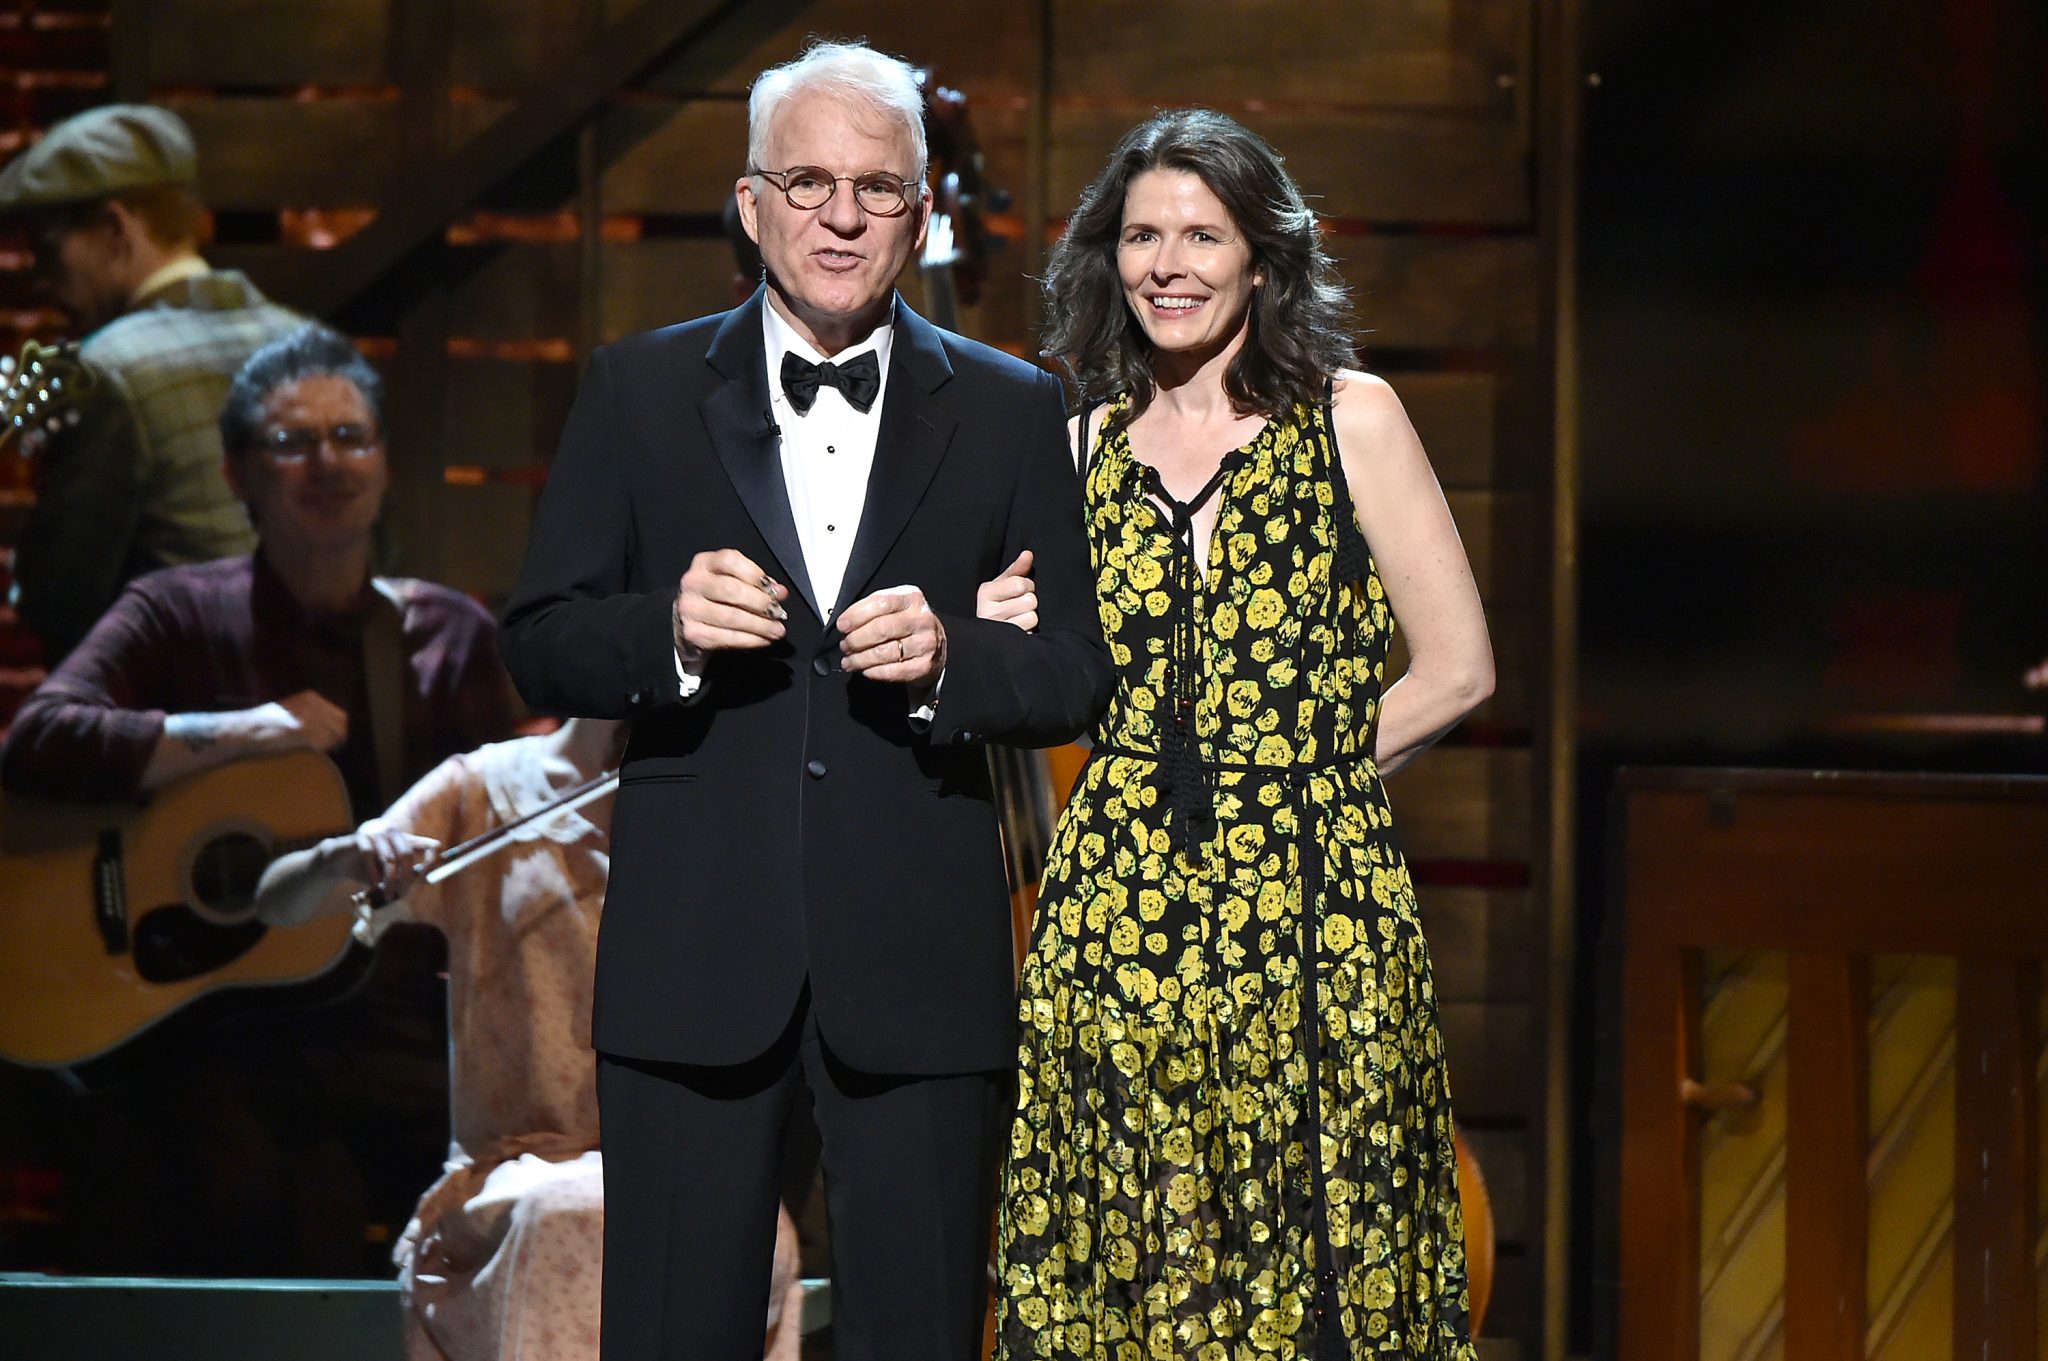 Anne Stringfield’s Wiki Facts to Know about Steve Martin’s Wife